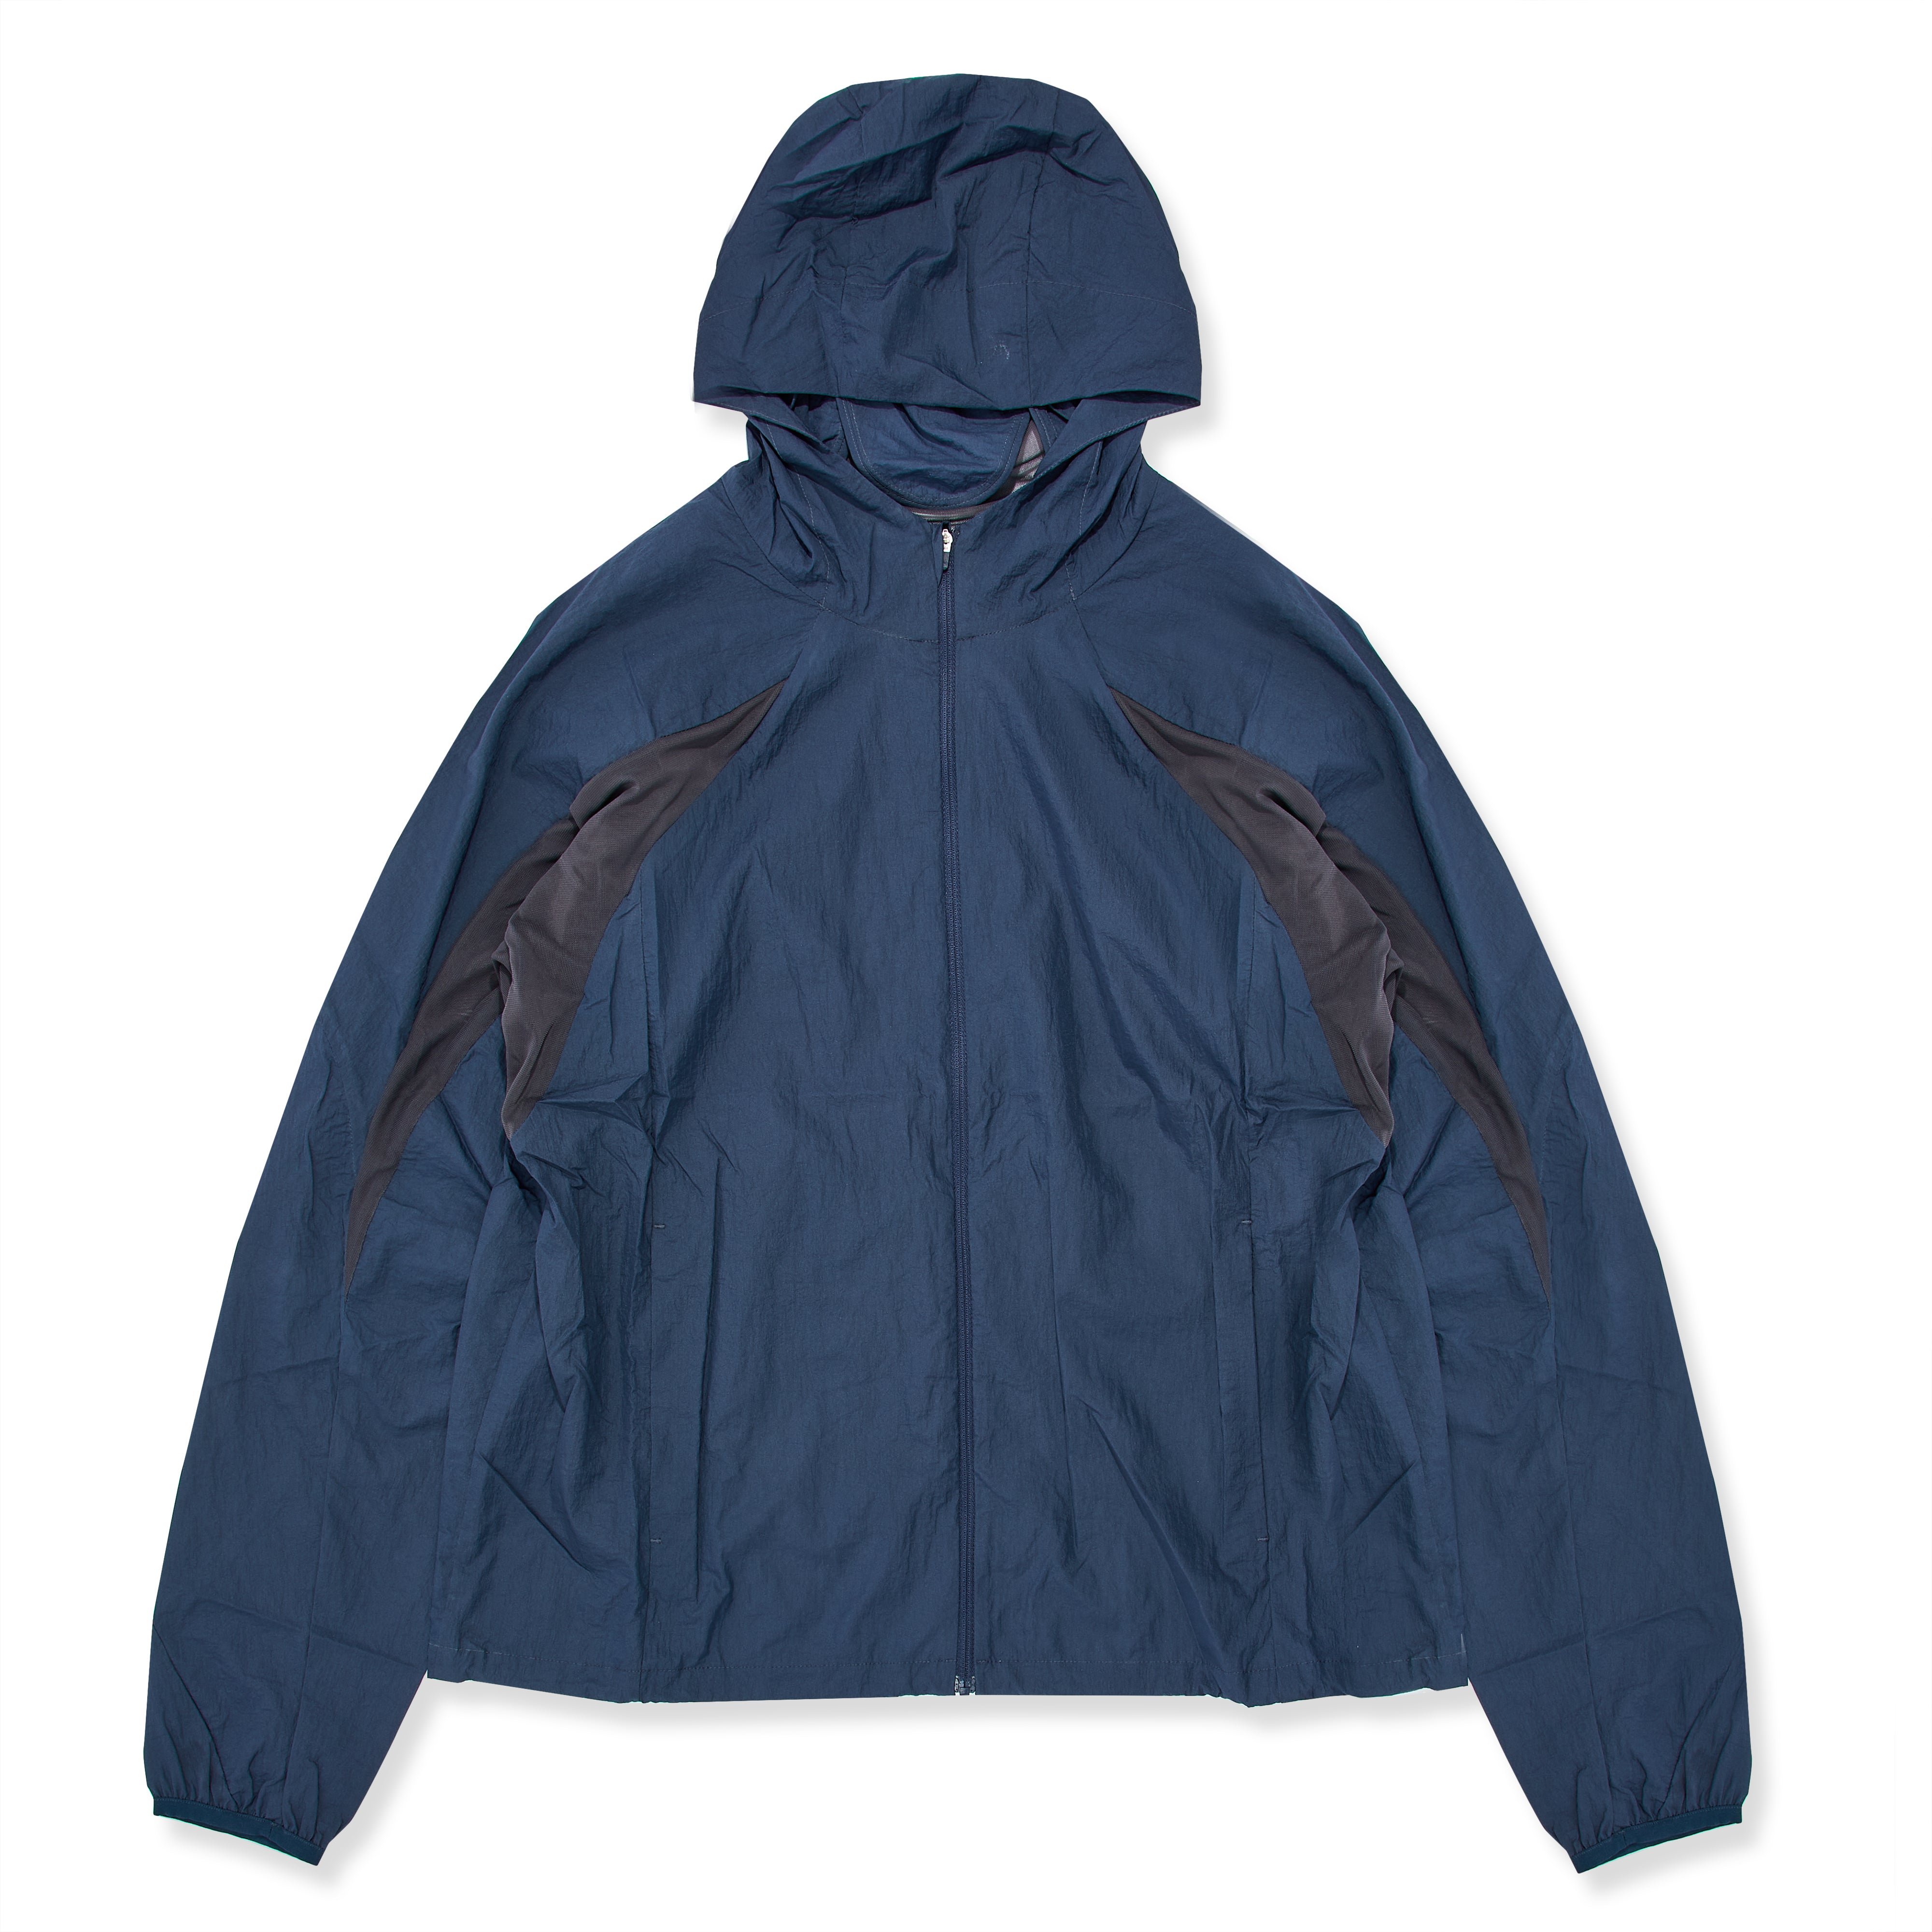 Post Archive Faction - 5.0+ Technical Jacket Right - (Navy